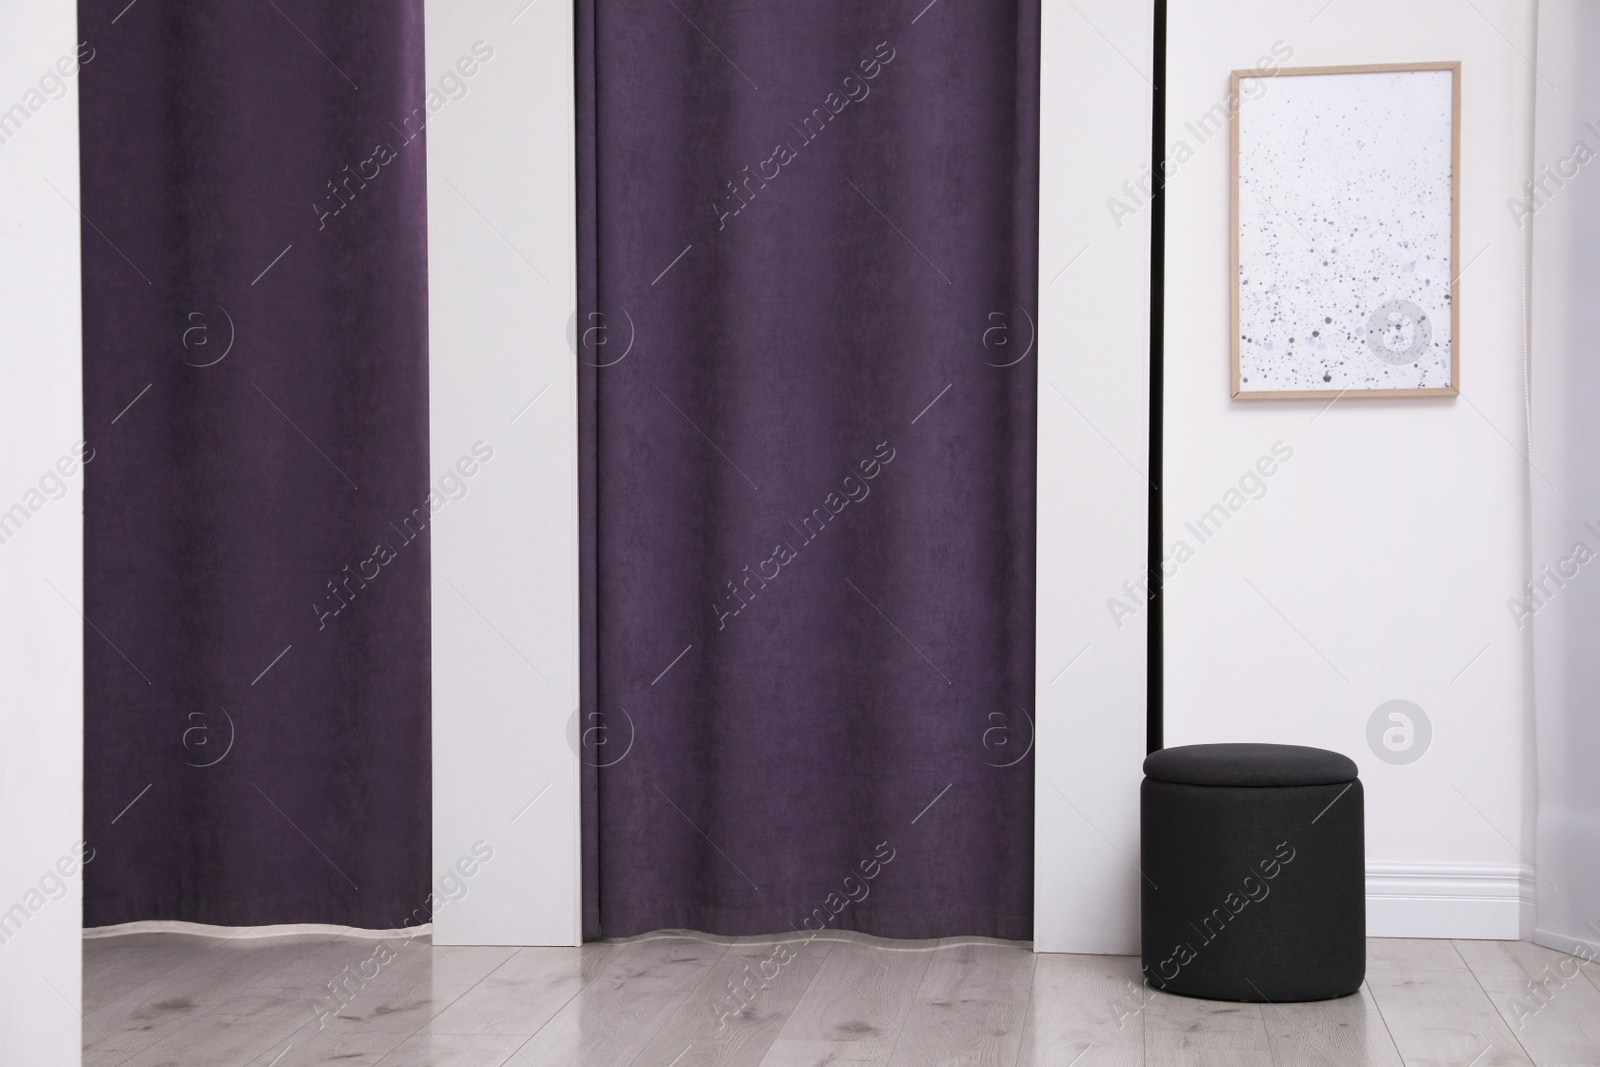 Photo of Dressing rooms with stylish purple curtains in fashion store